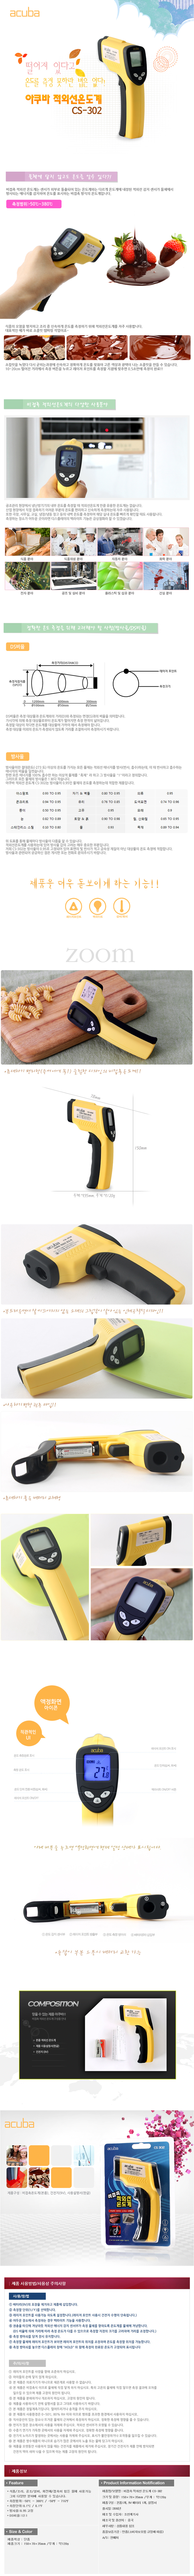 infrared_lines_thermometer_cs302